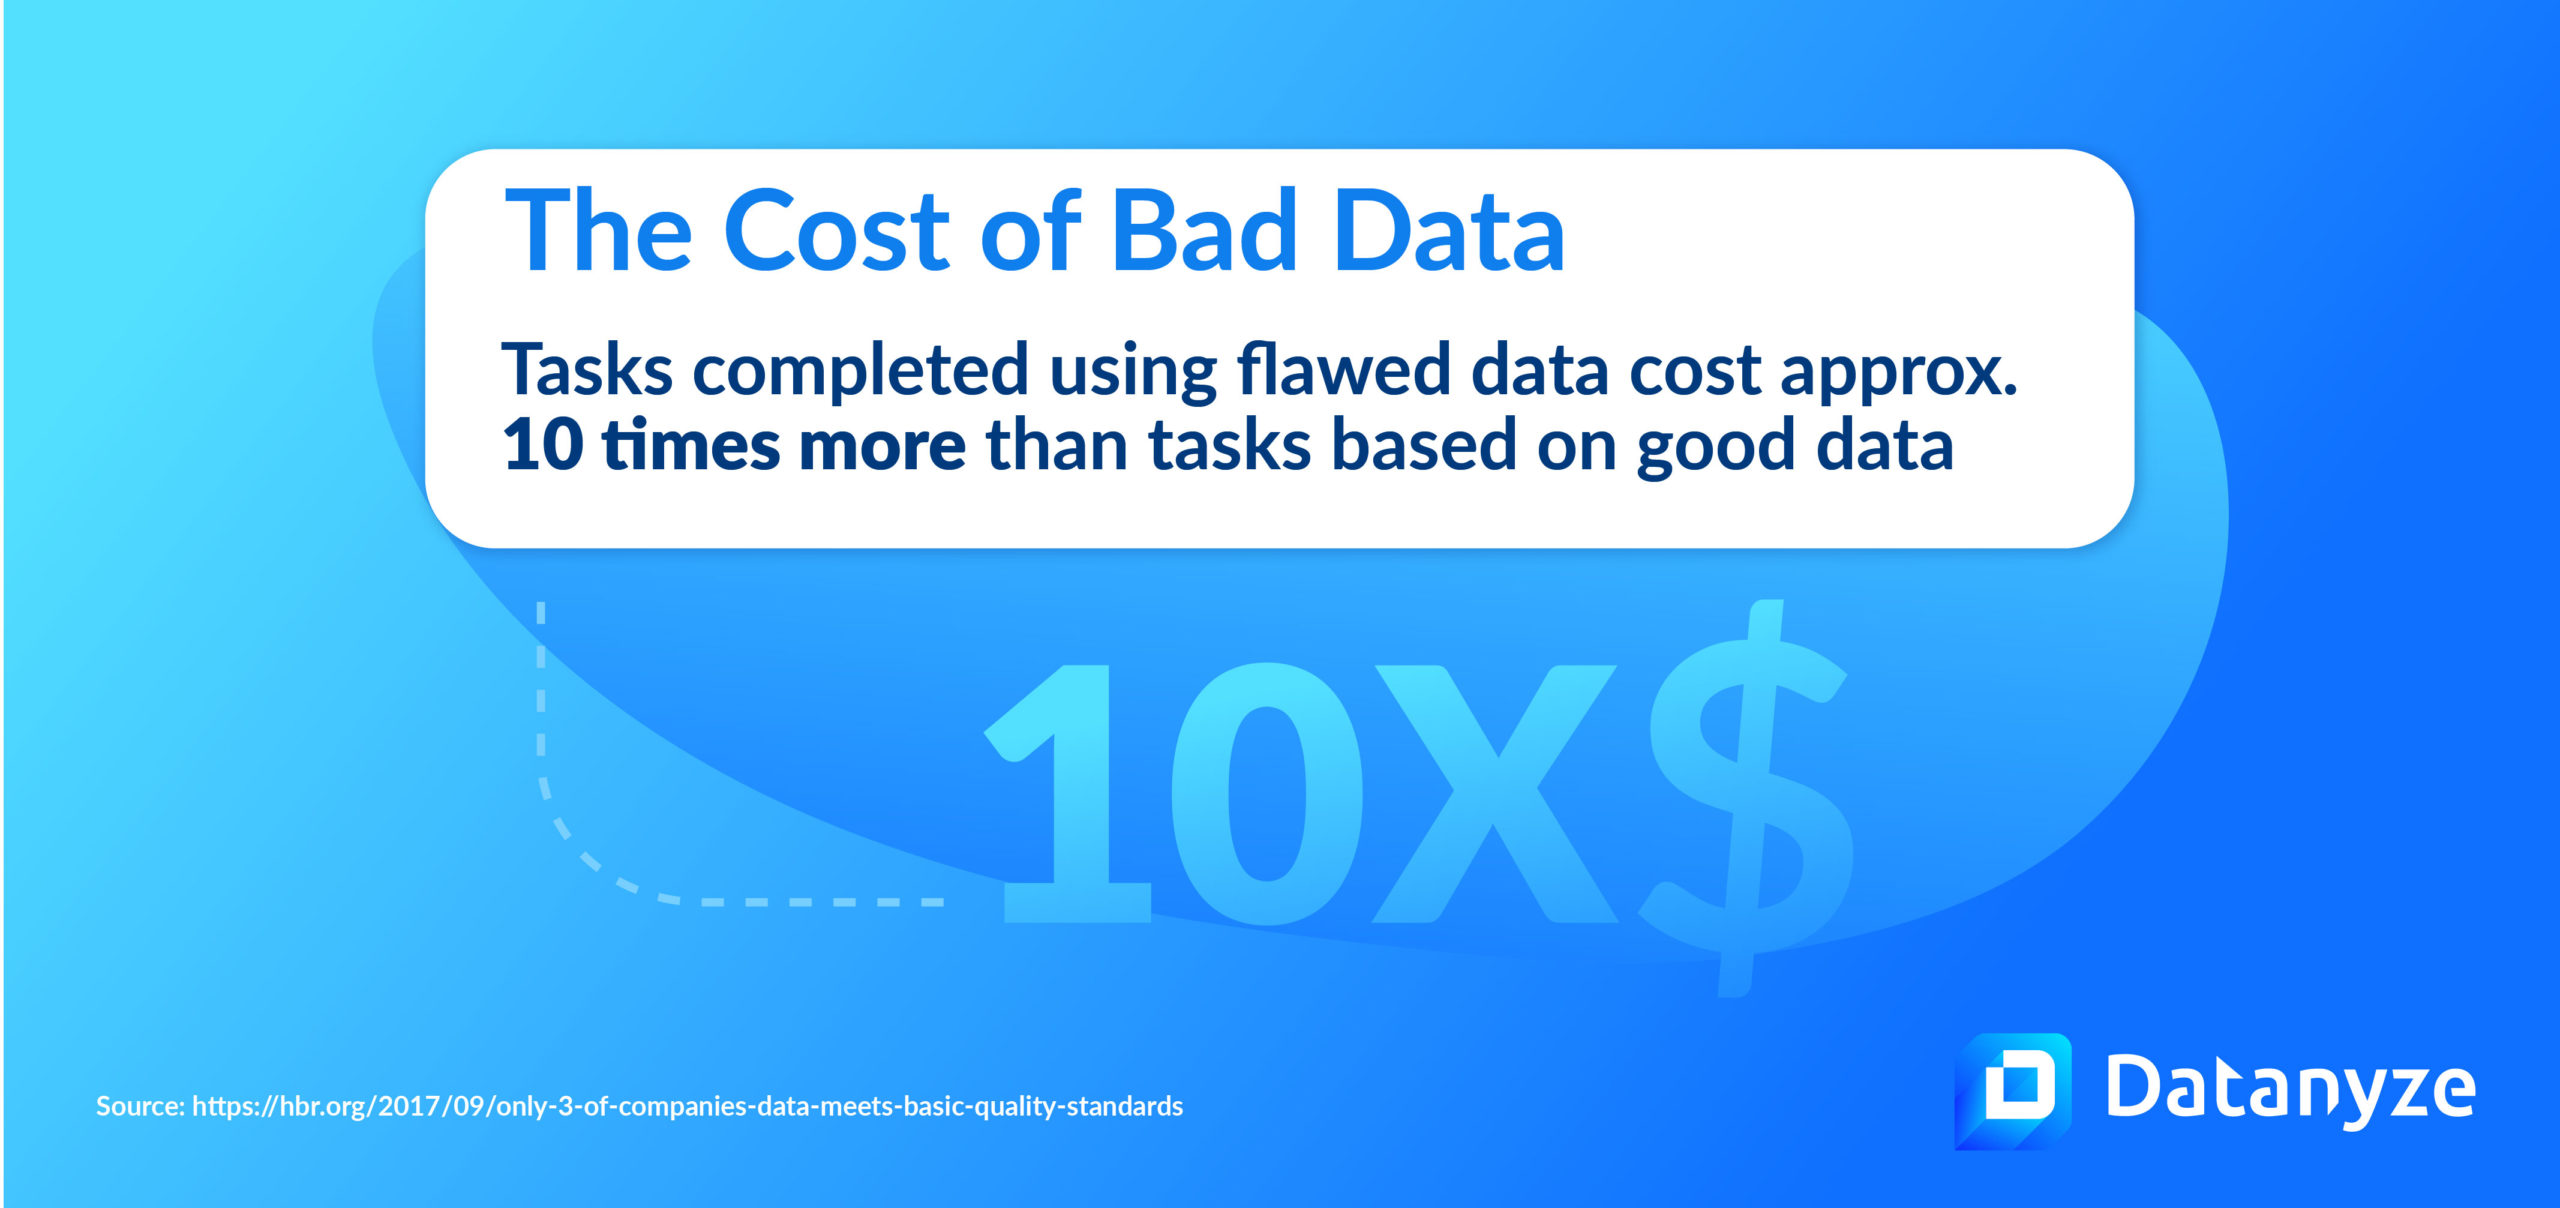 Tasks completed using flawed data cost approx. 10 times more than tasks based on good data